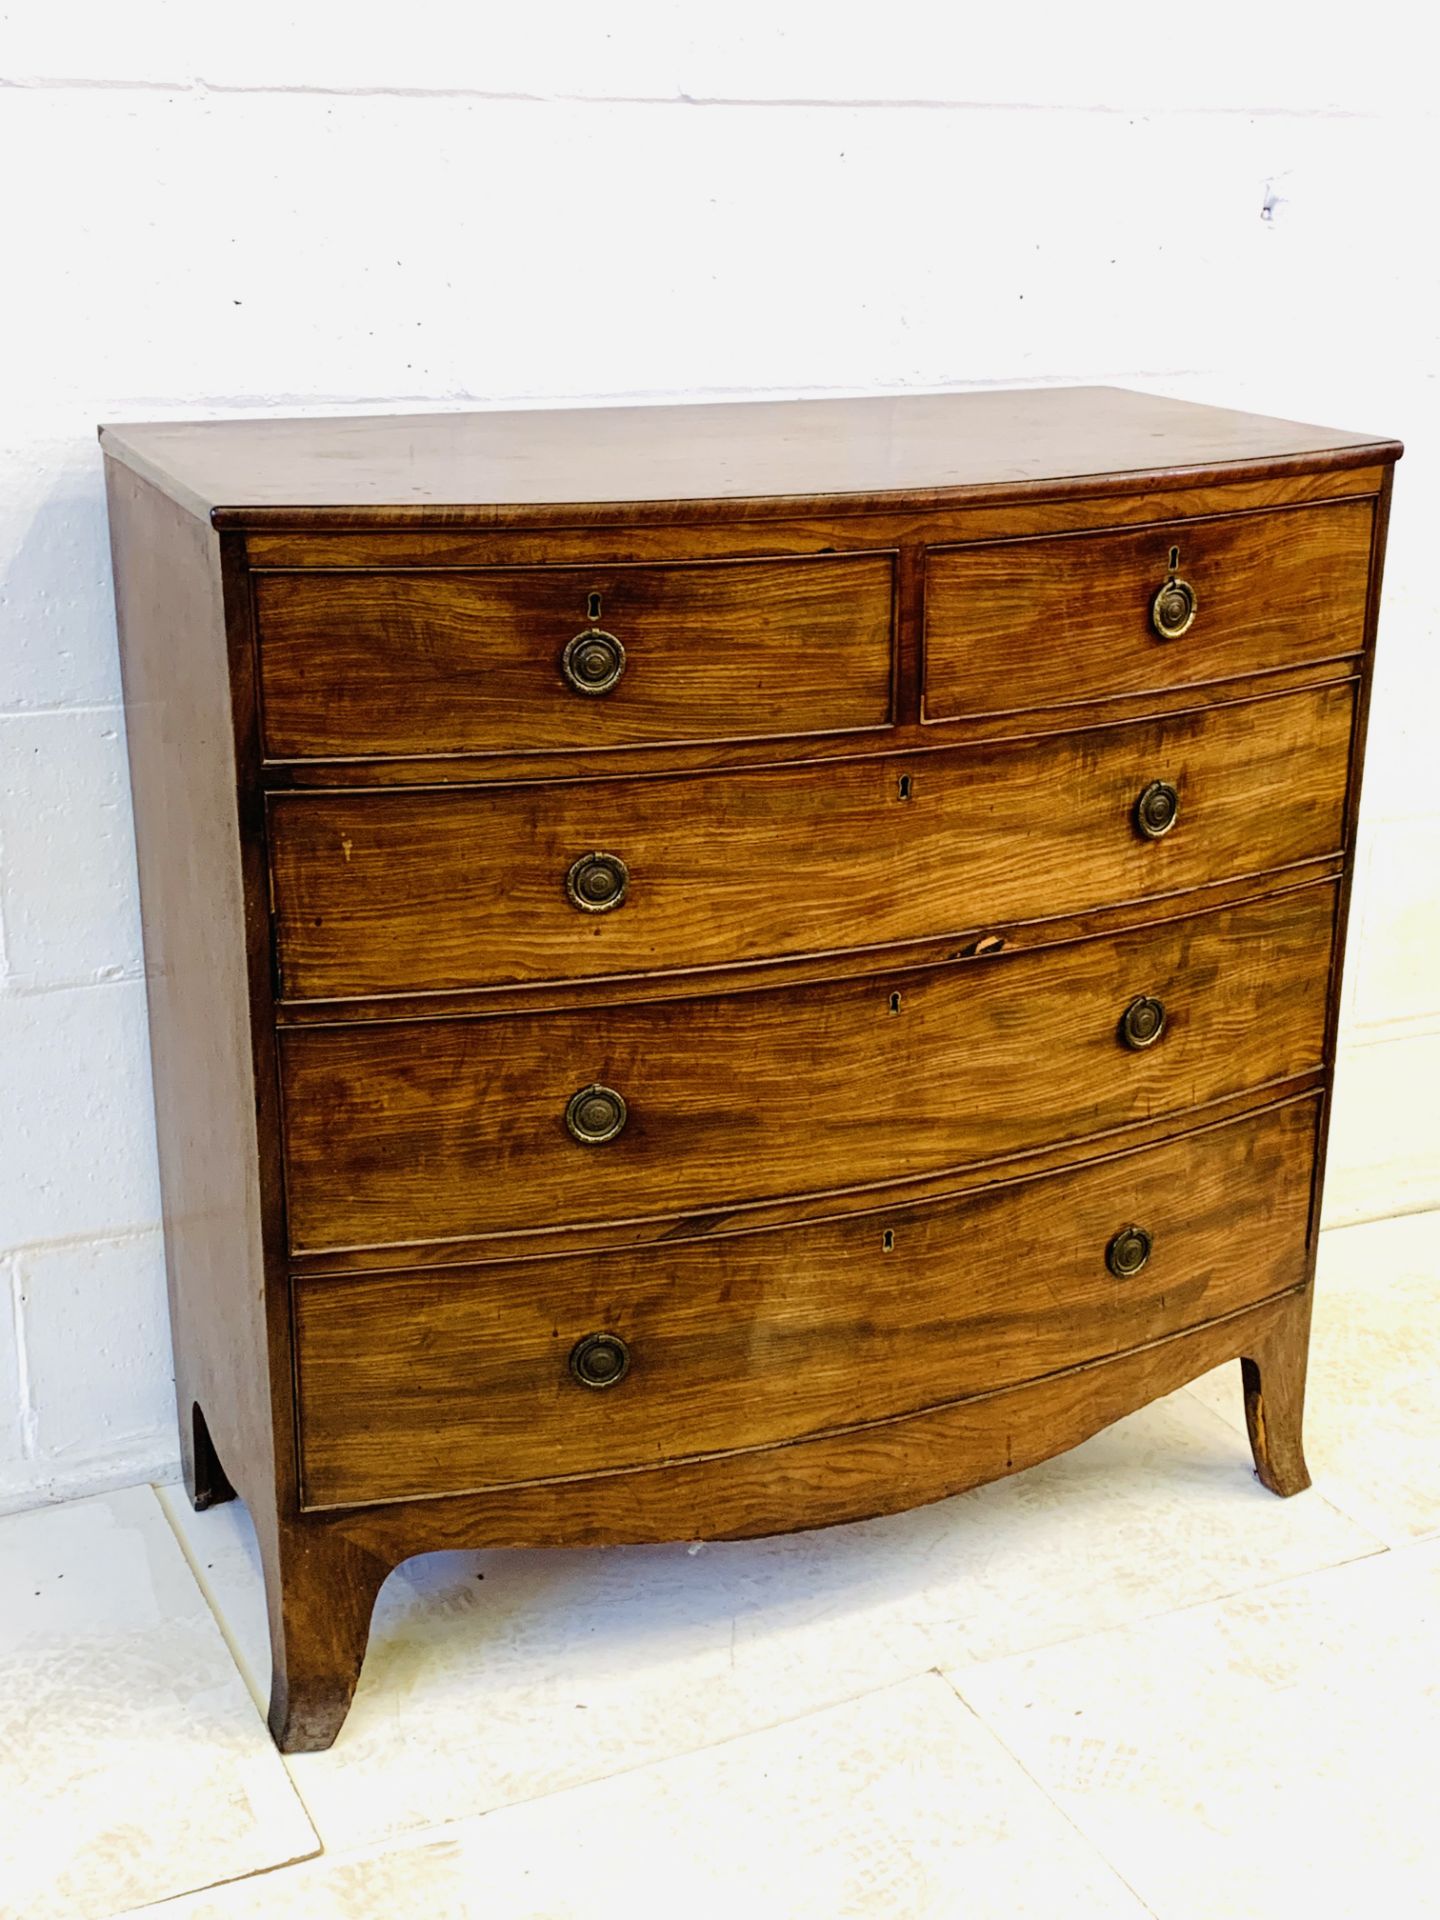 Mahogany chest of drawers - Image 2 of 6